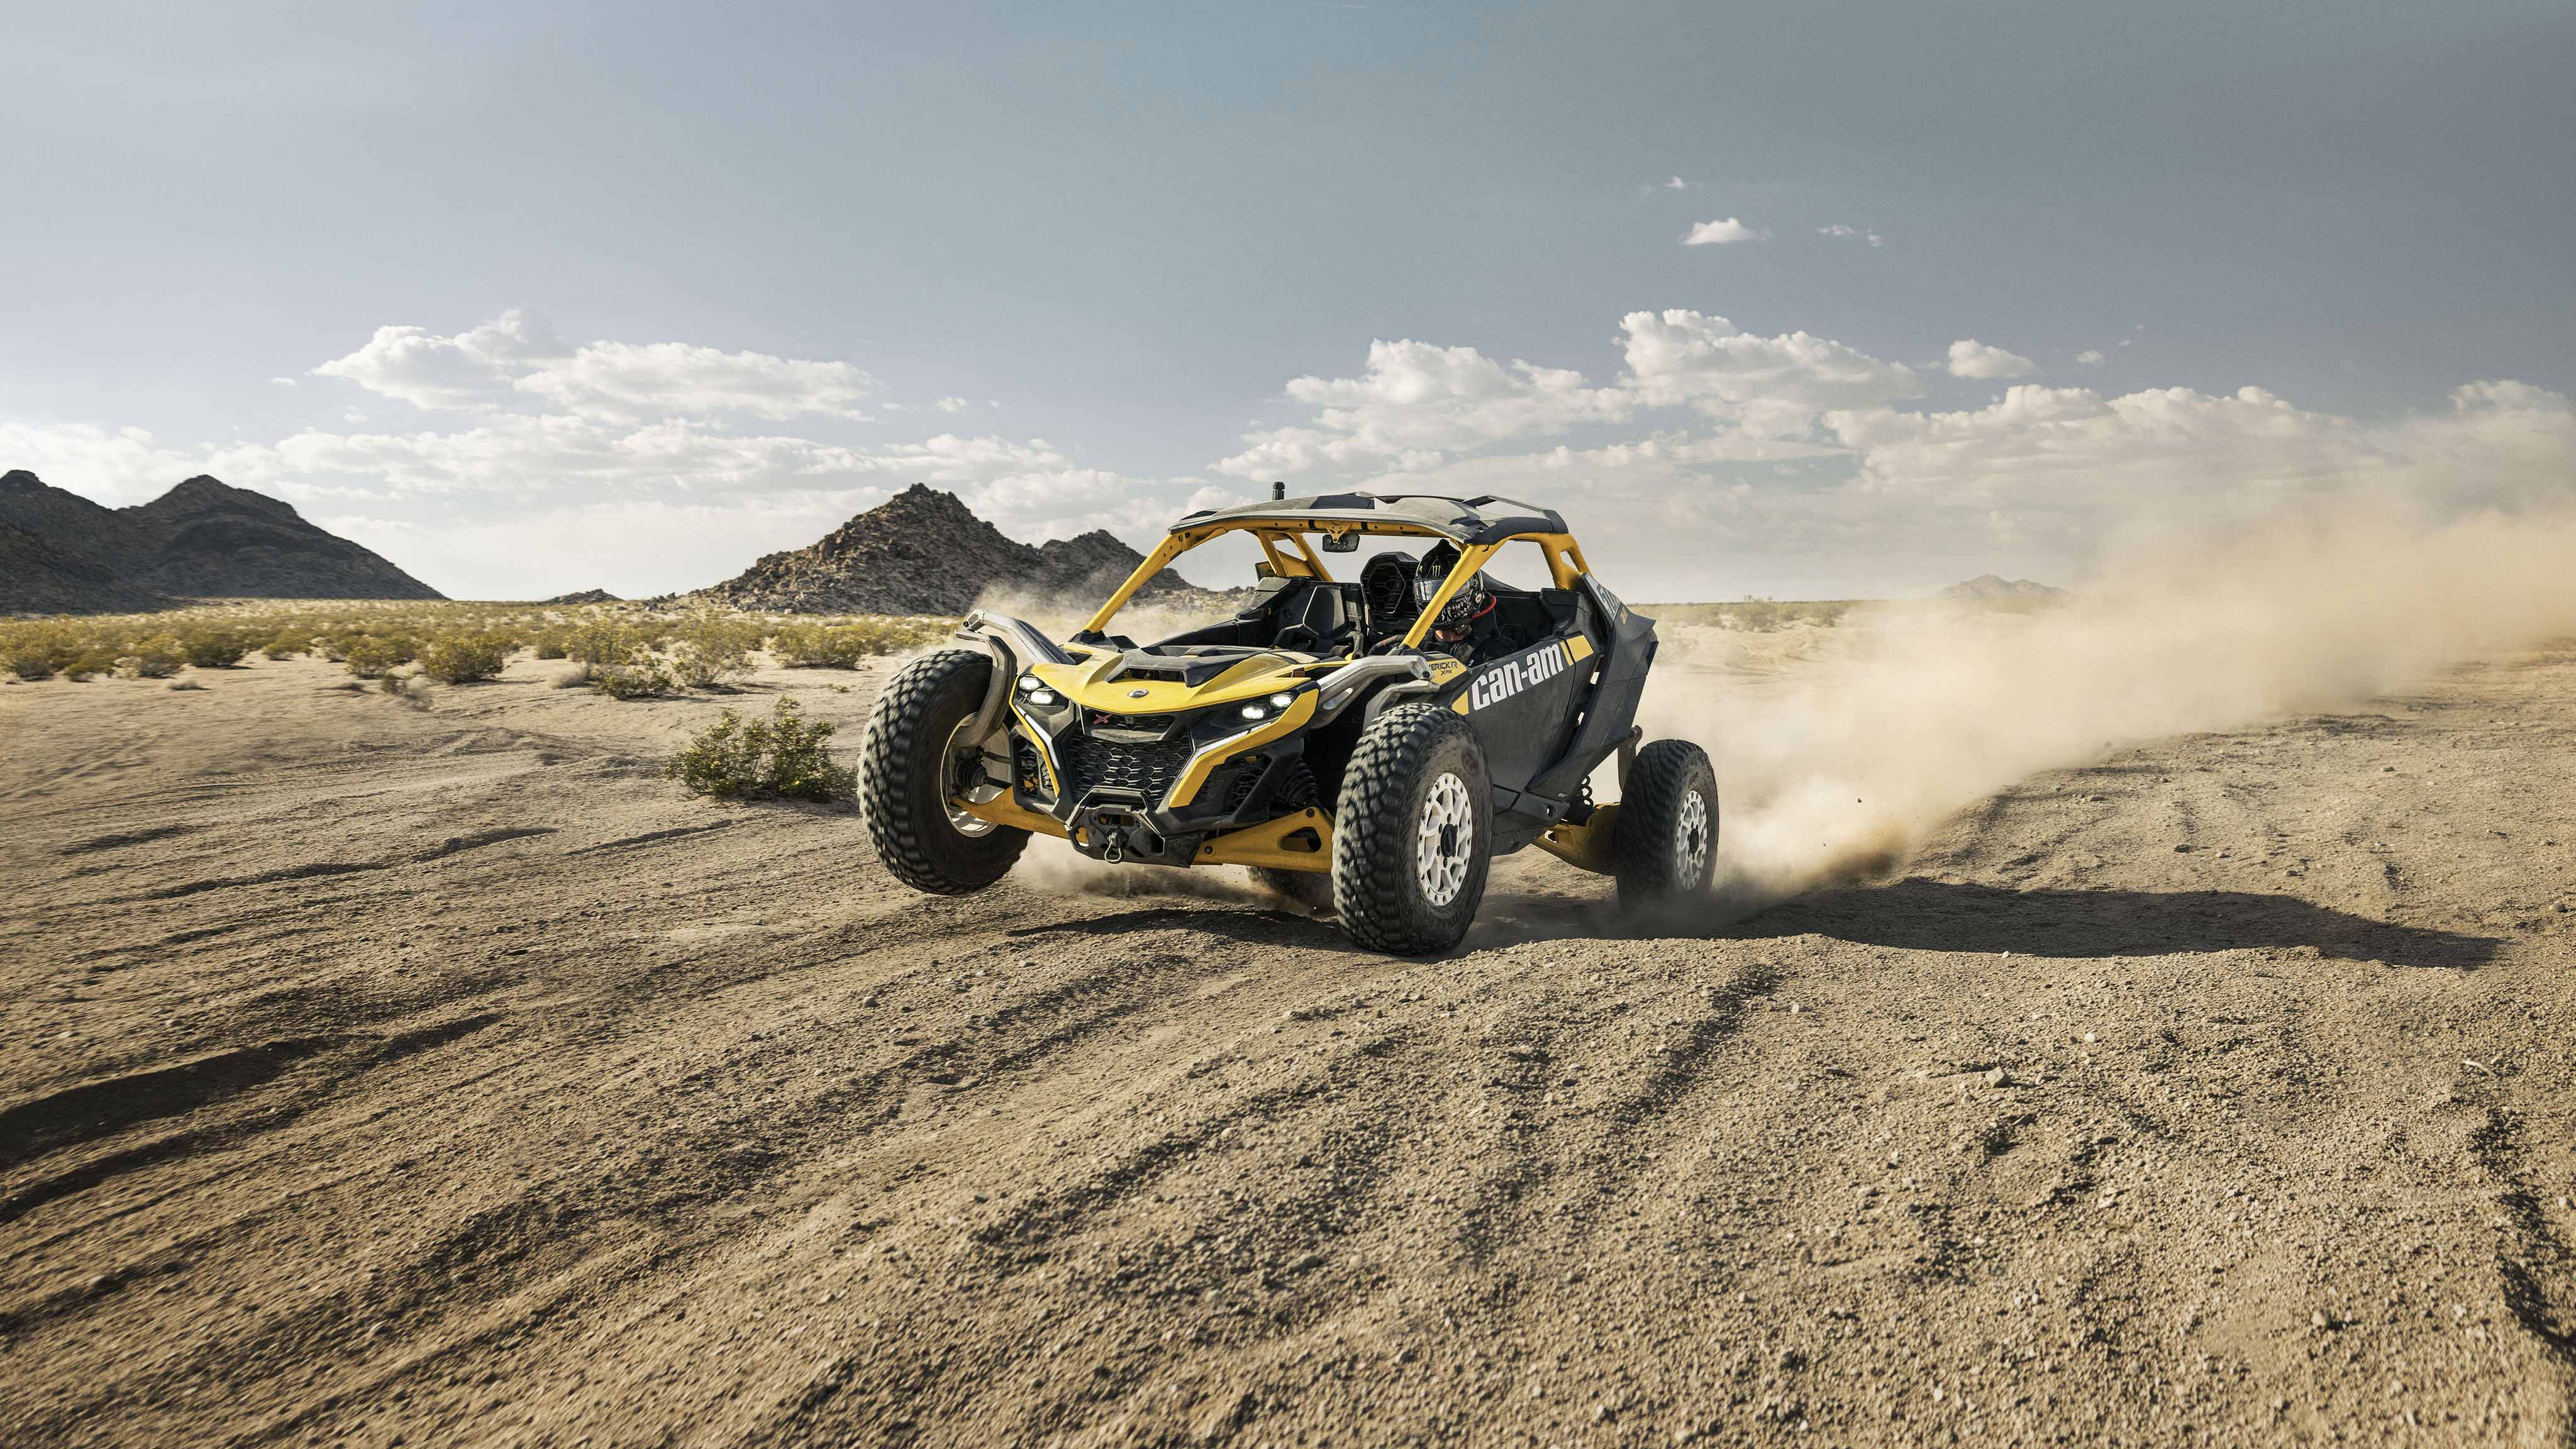 A Can-Am Maverick R X rs riding in the desert